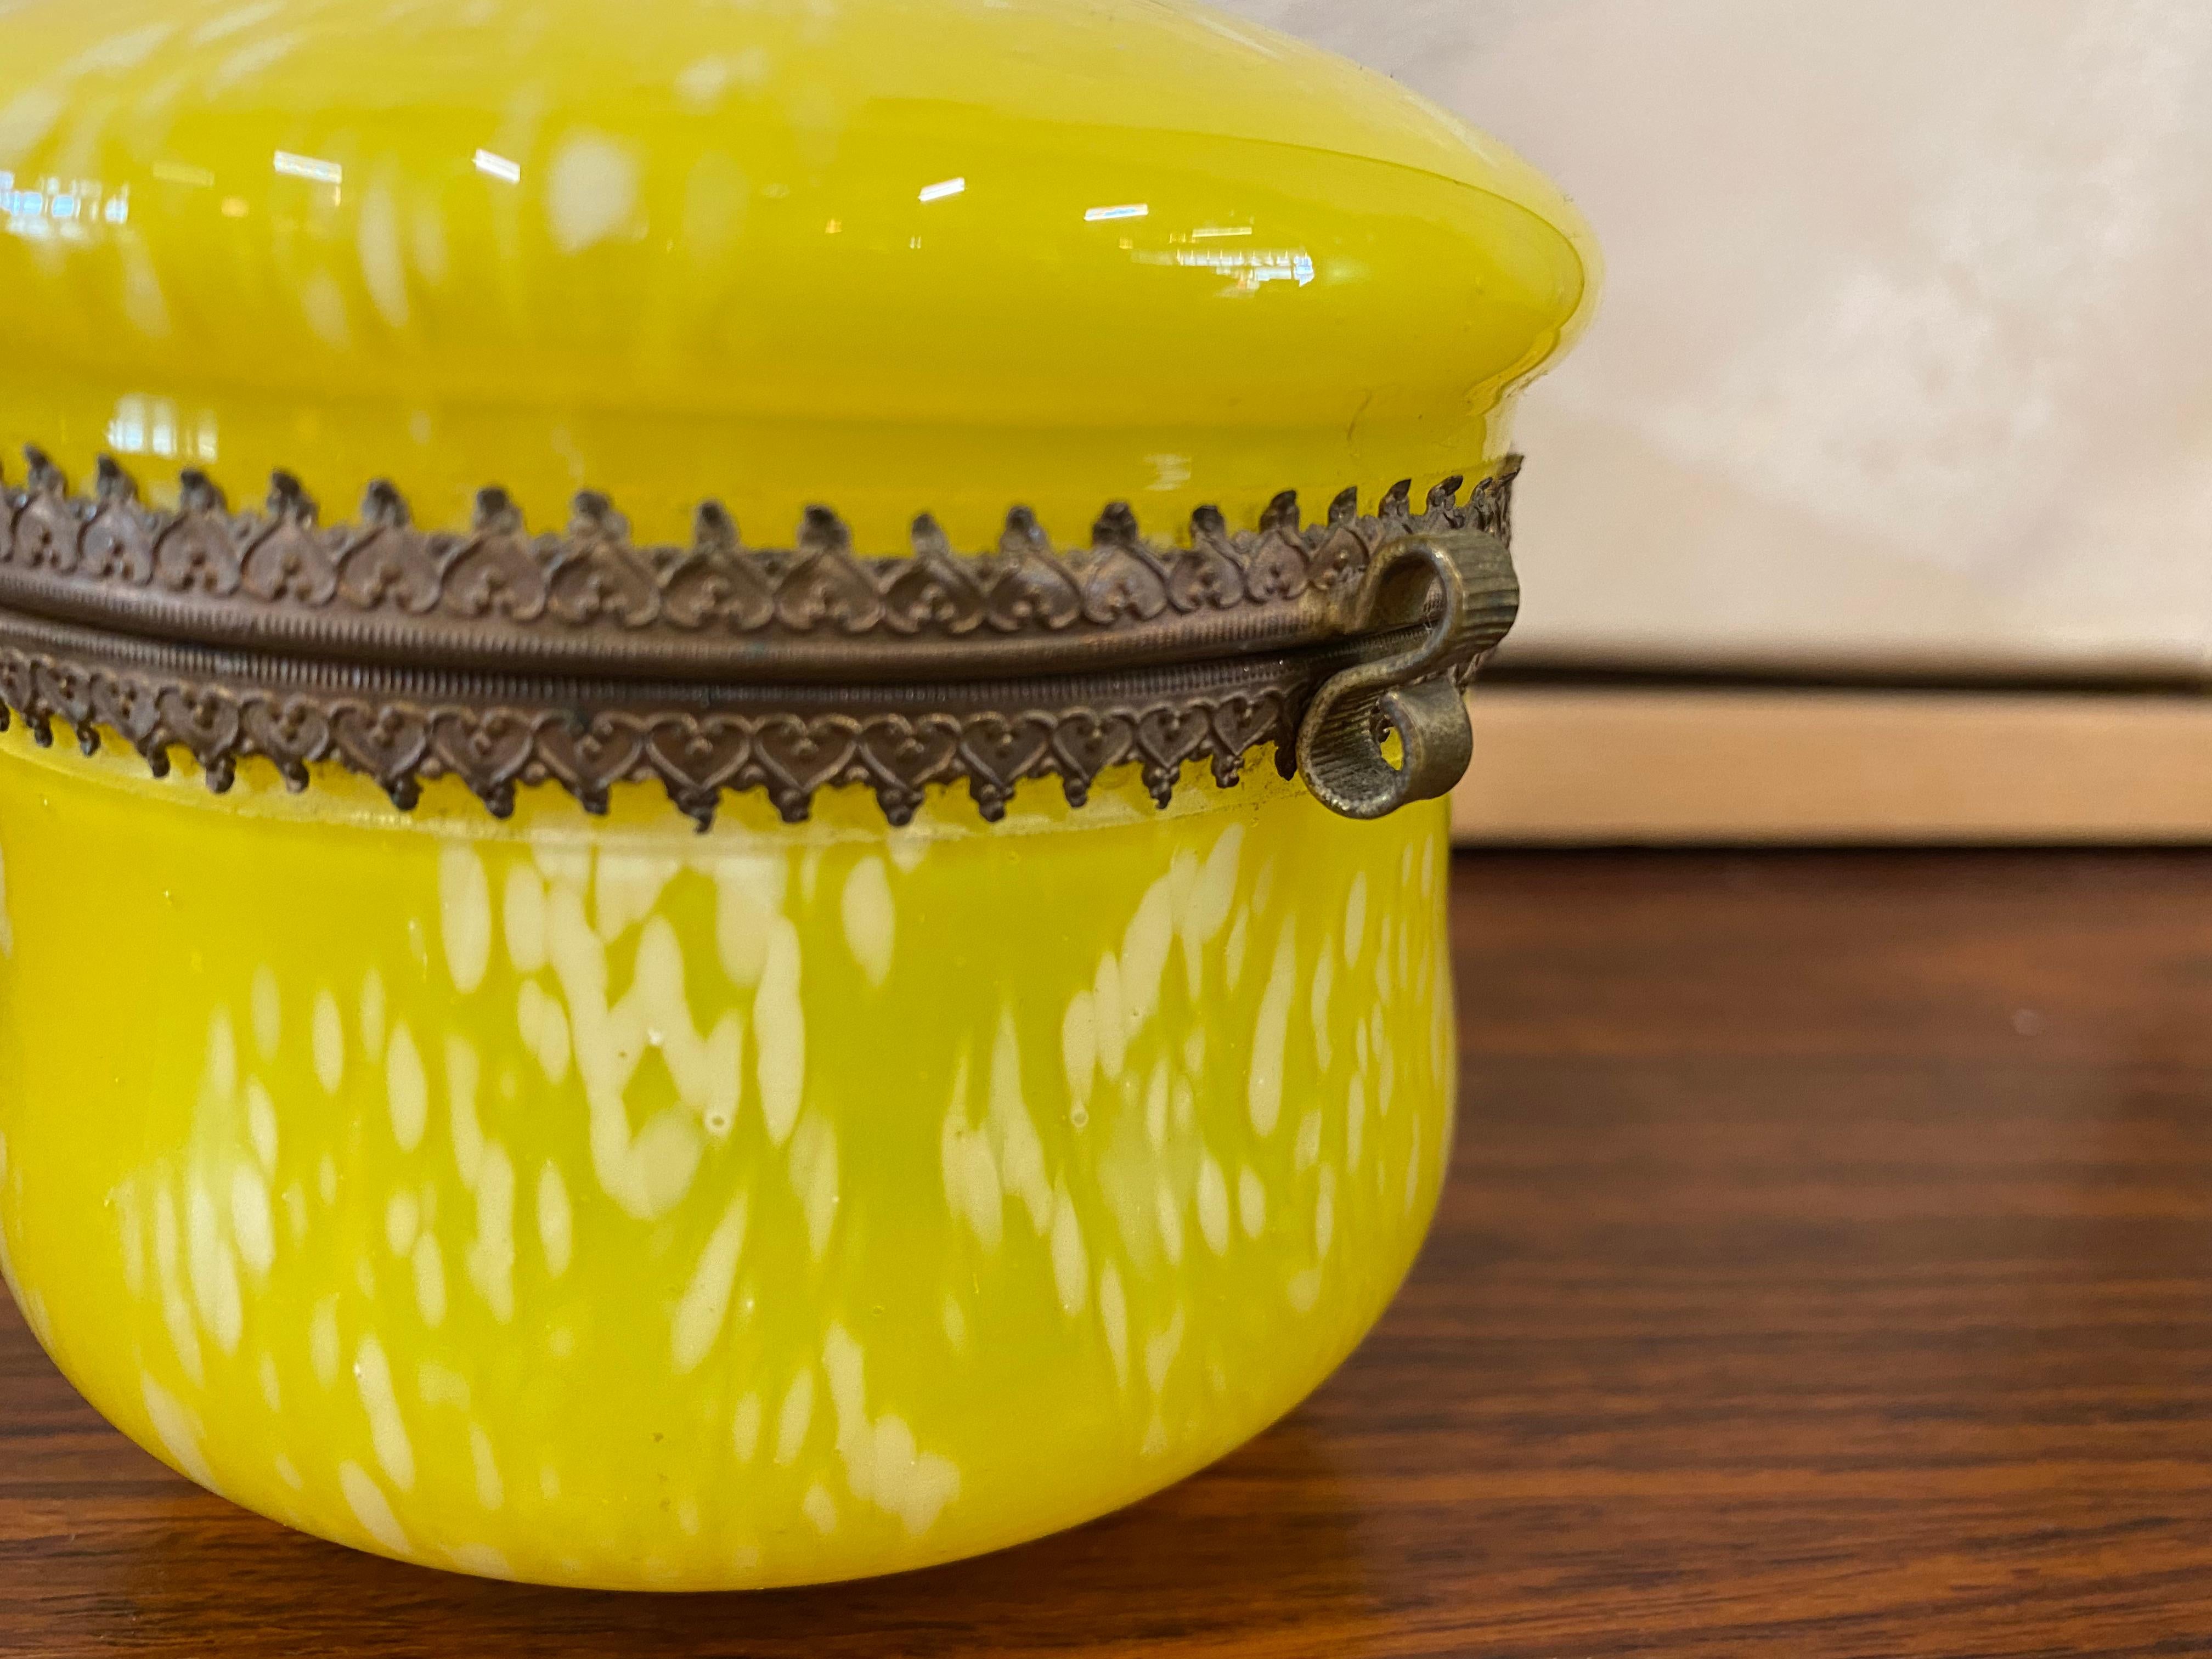 Biedermeier glass jar with lid from around 1900. An antique decorative accessory made of yellow colored glass and brass. The yellow glass is speckled white and mouth blown. The jar and lid each have a decorative brass rim and are connected by this.